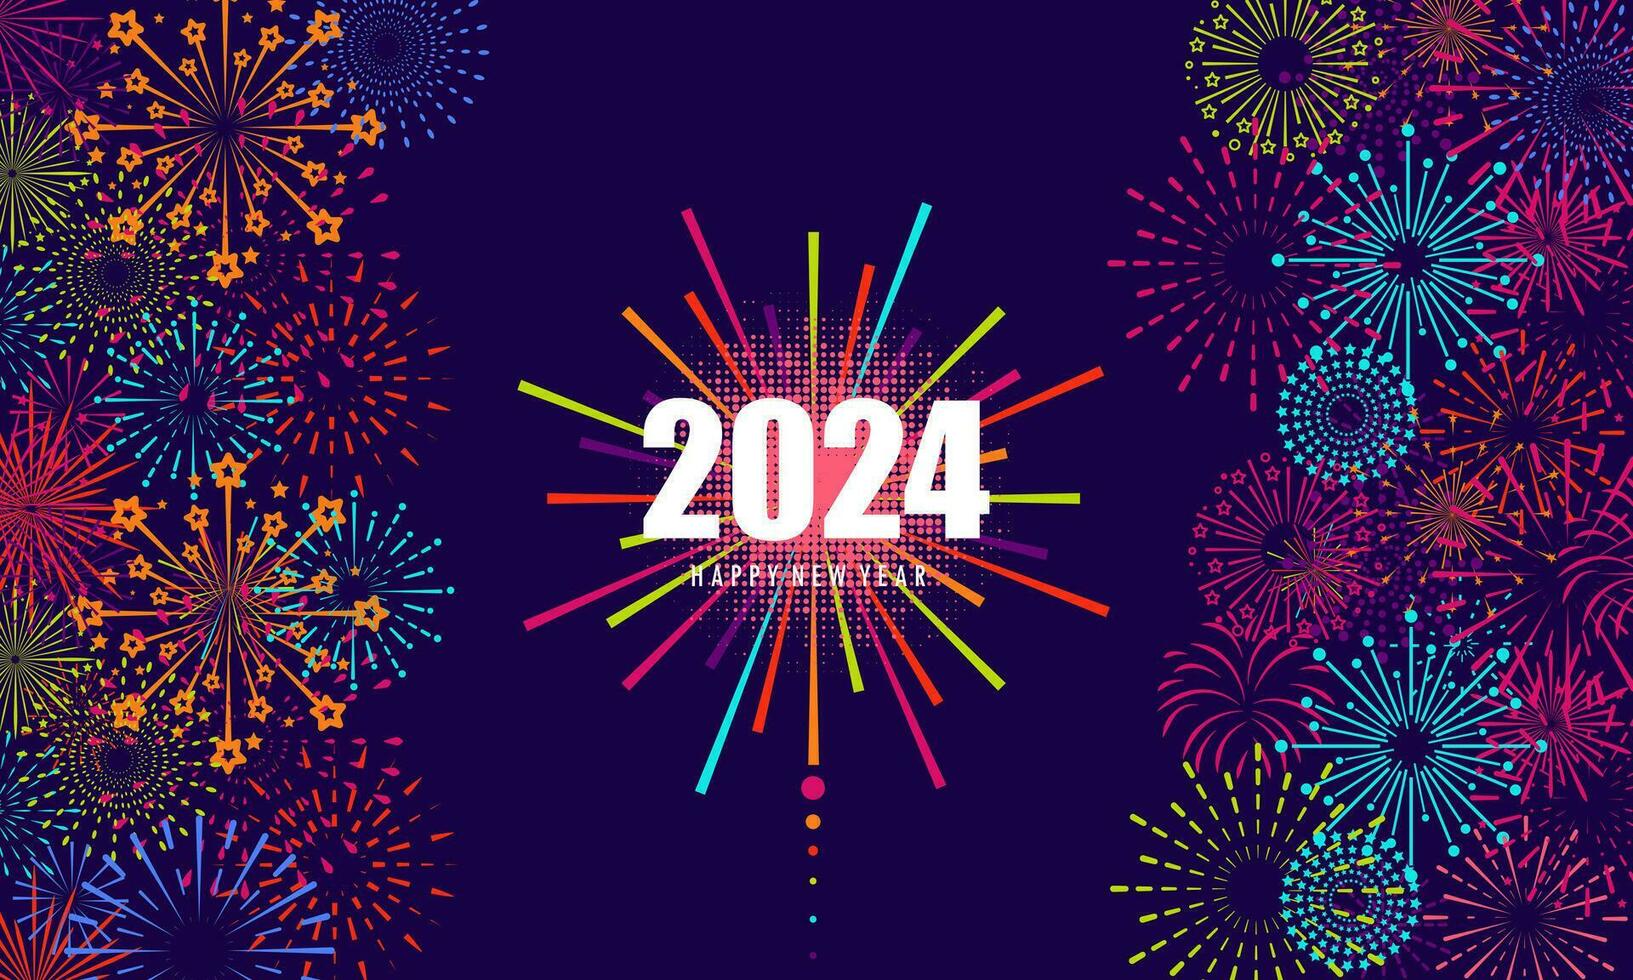 Greeting card with inscription Happy New Year 2024 on Firework background  vector design